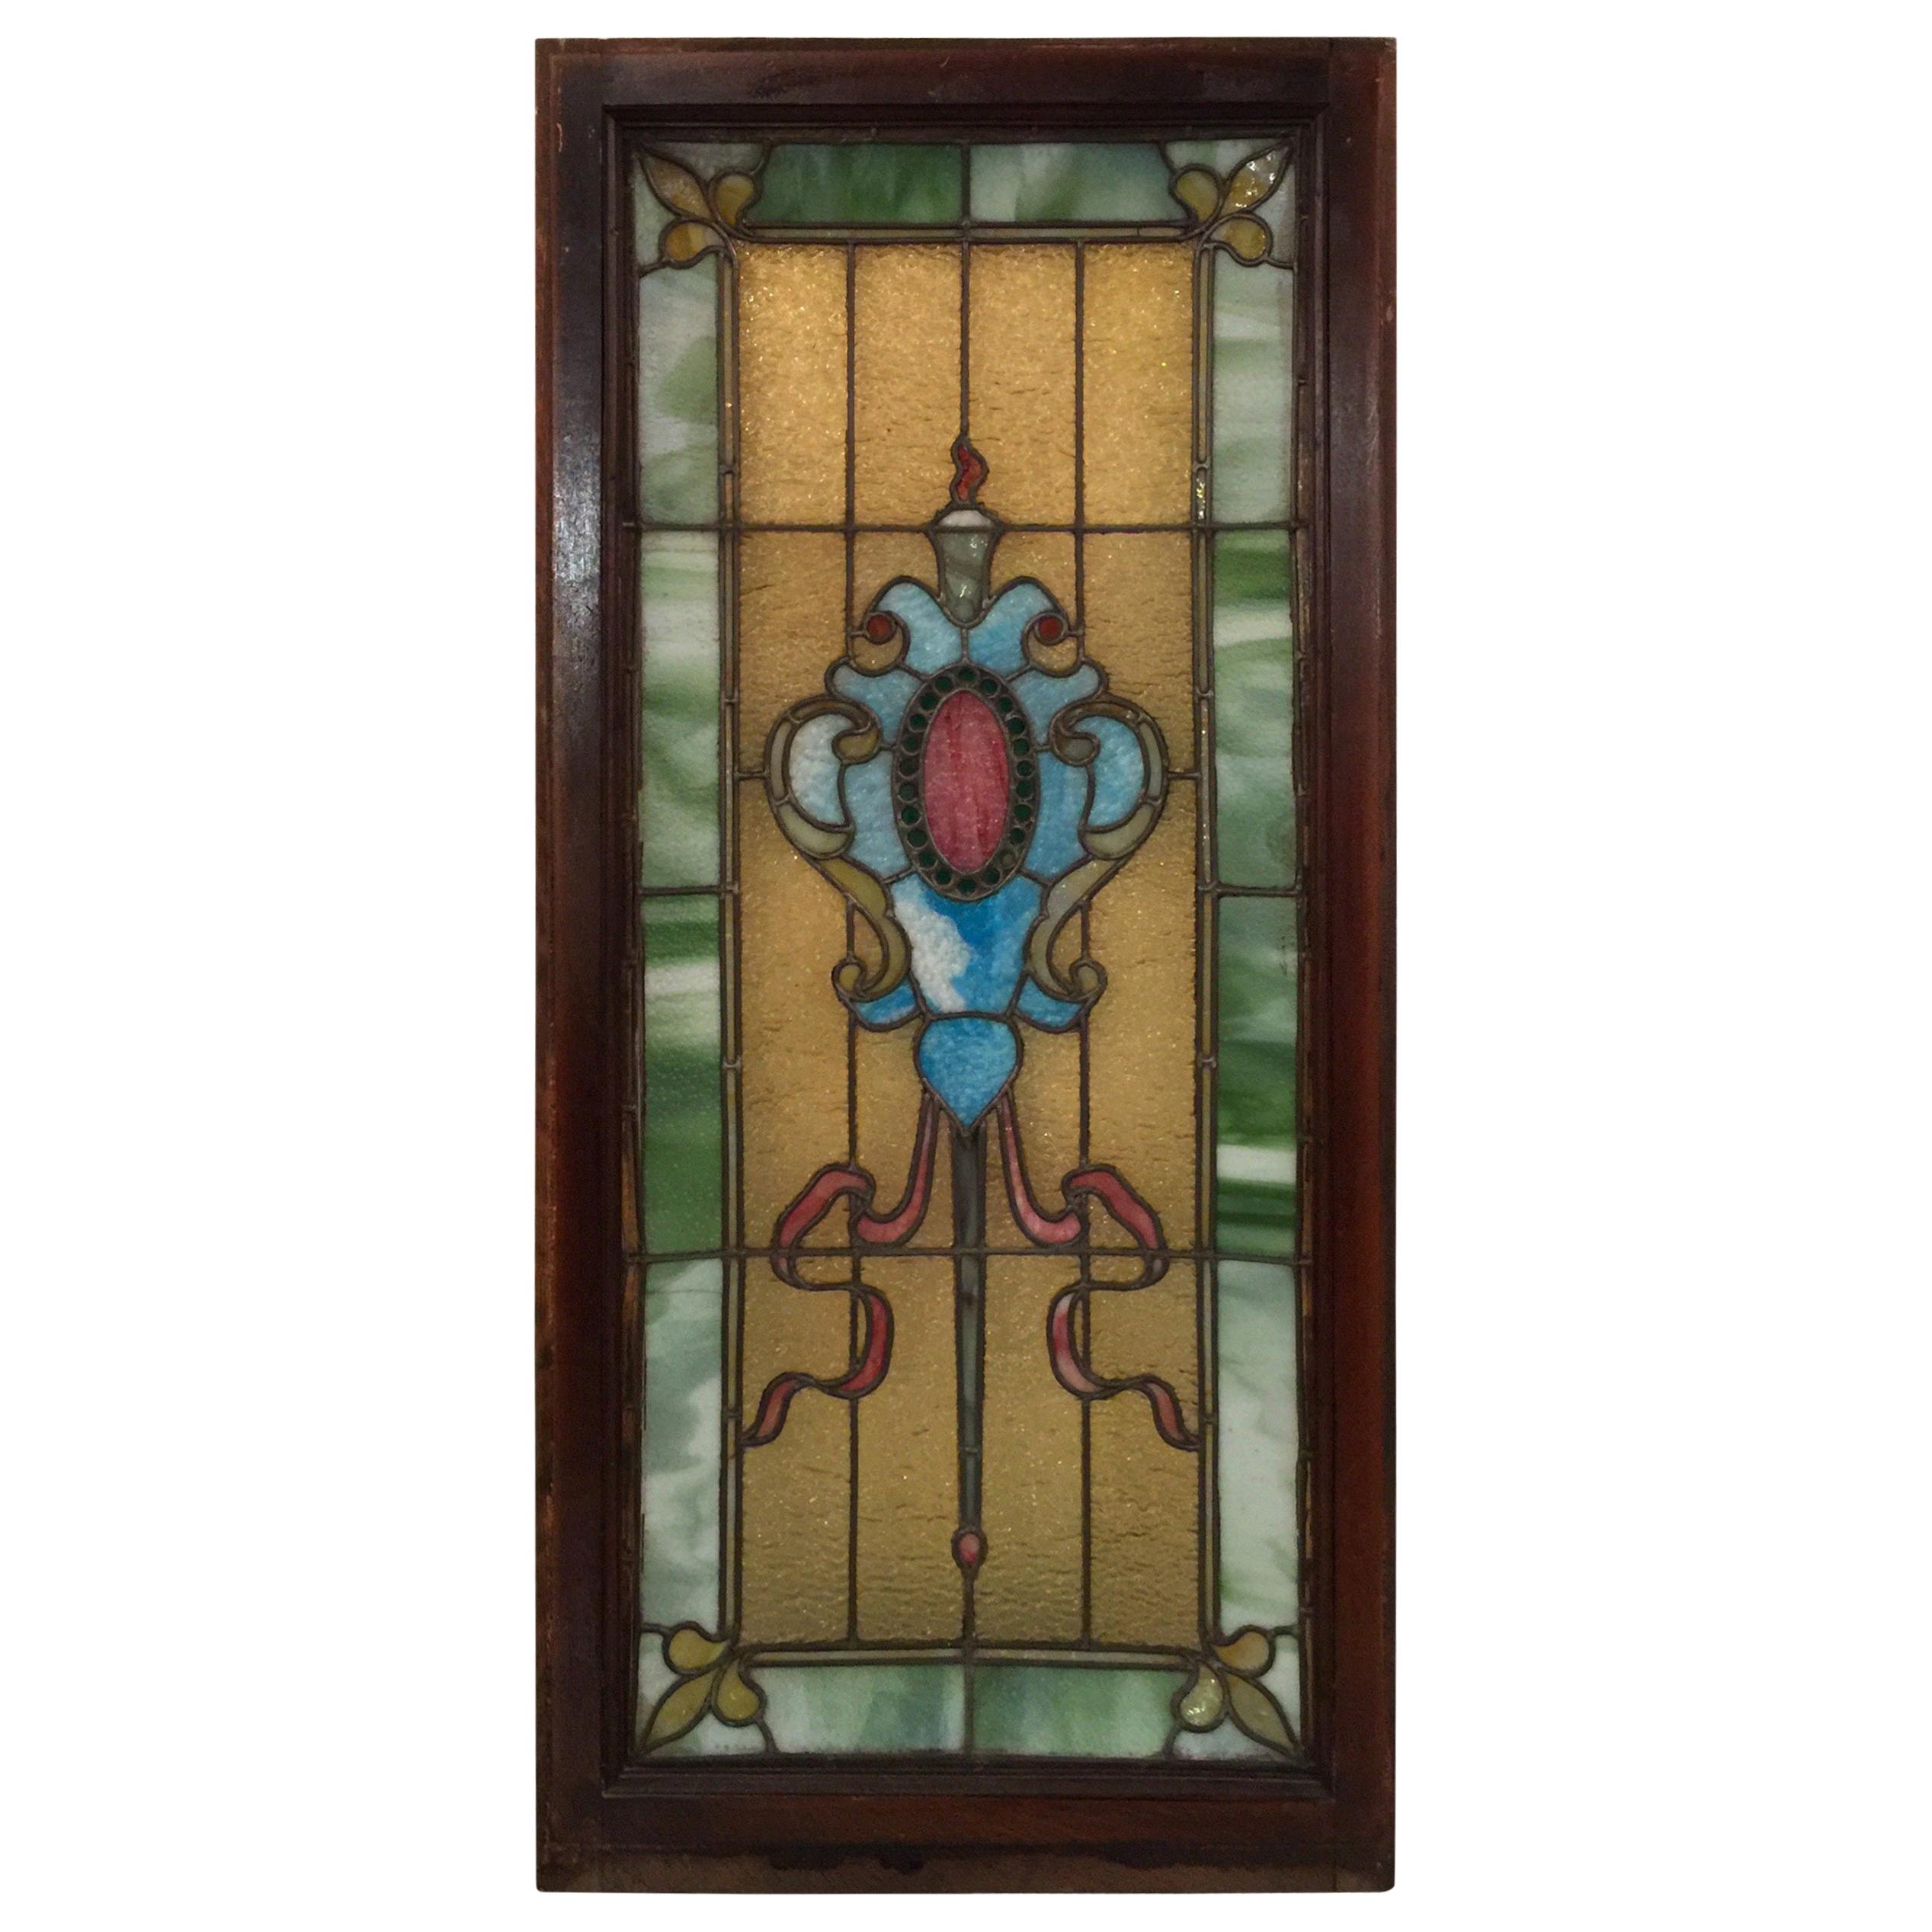 Original 19th Century Stained Glass Panel with Wood Frame